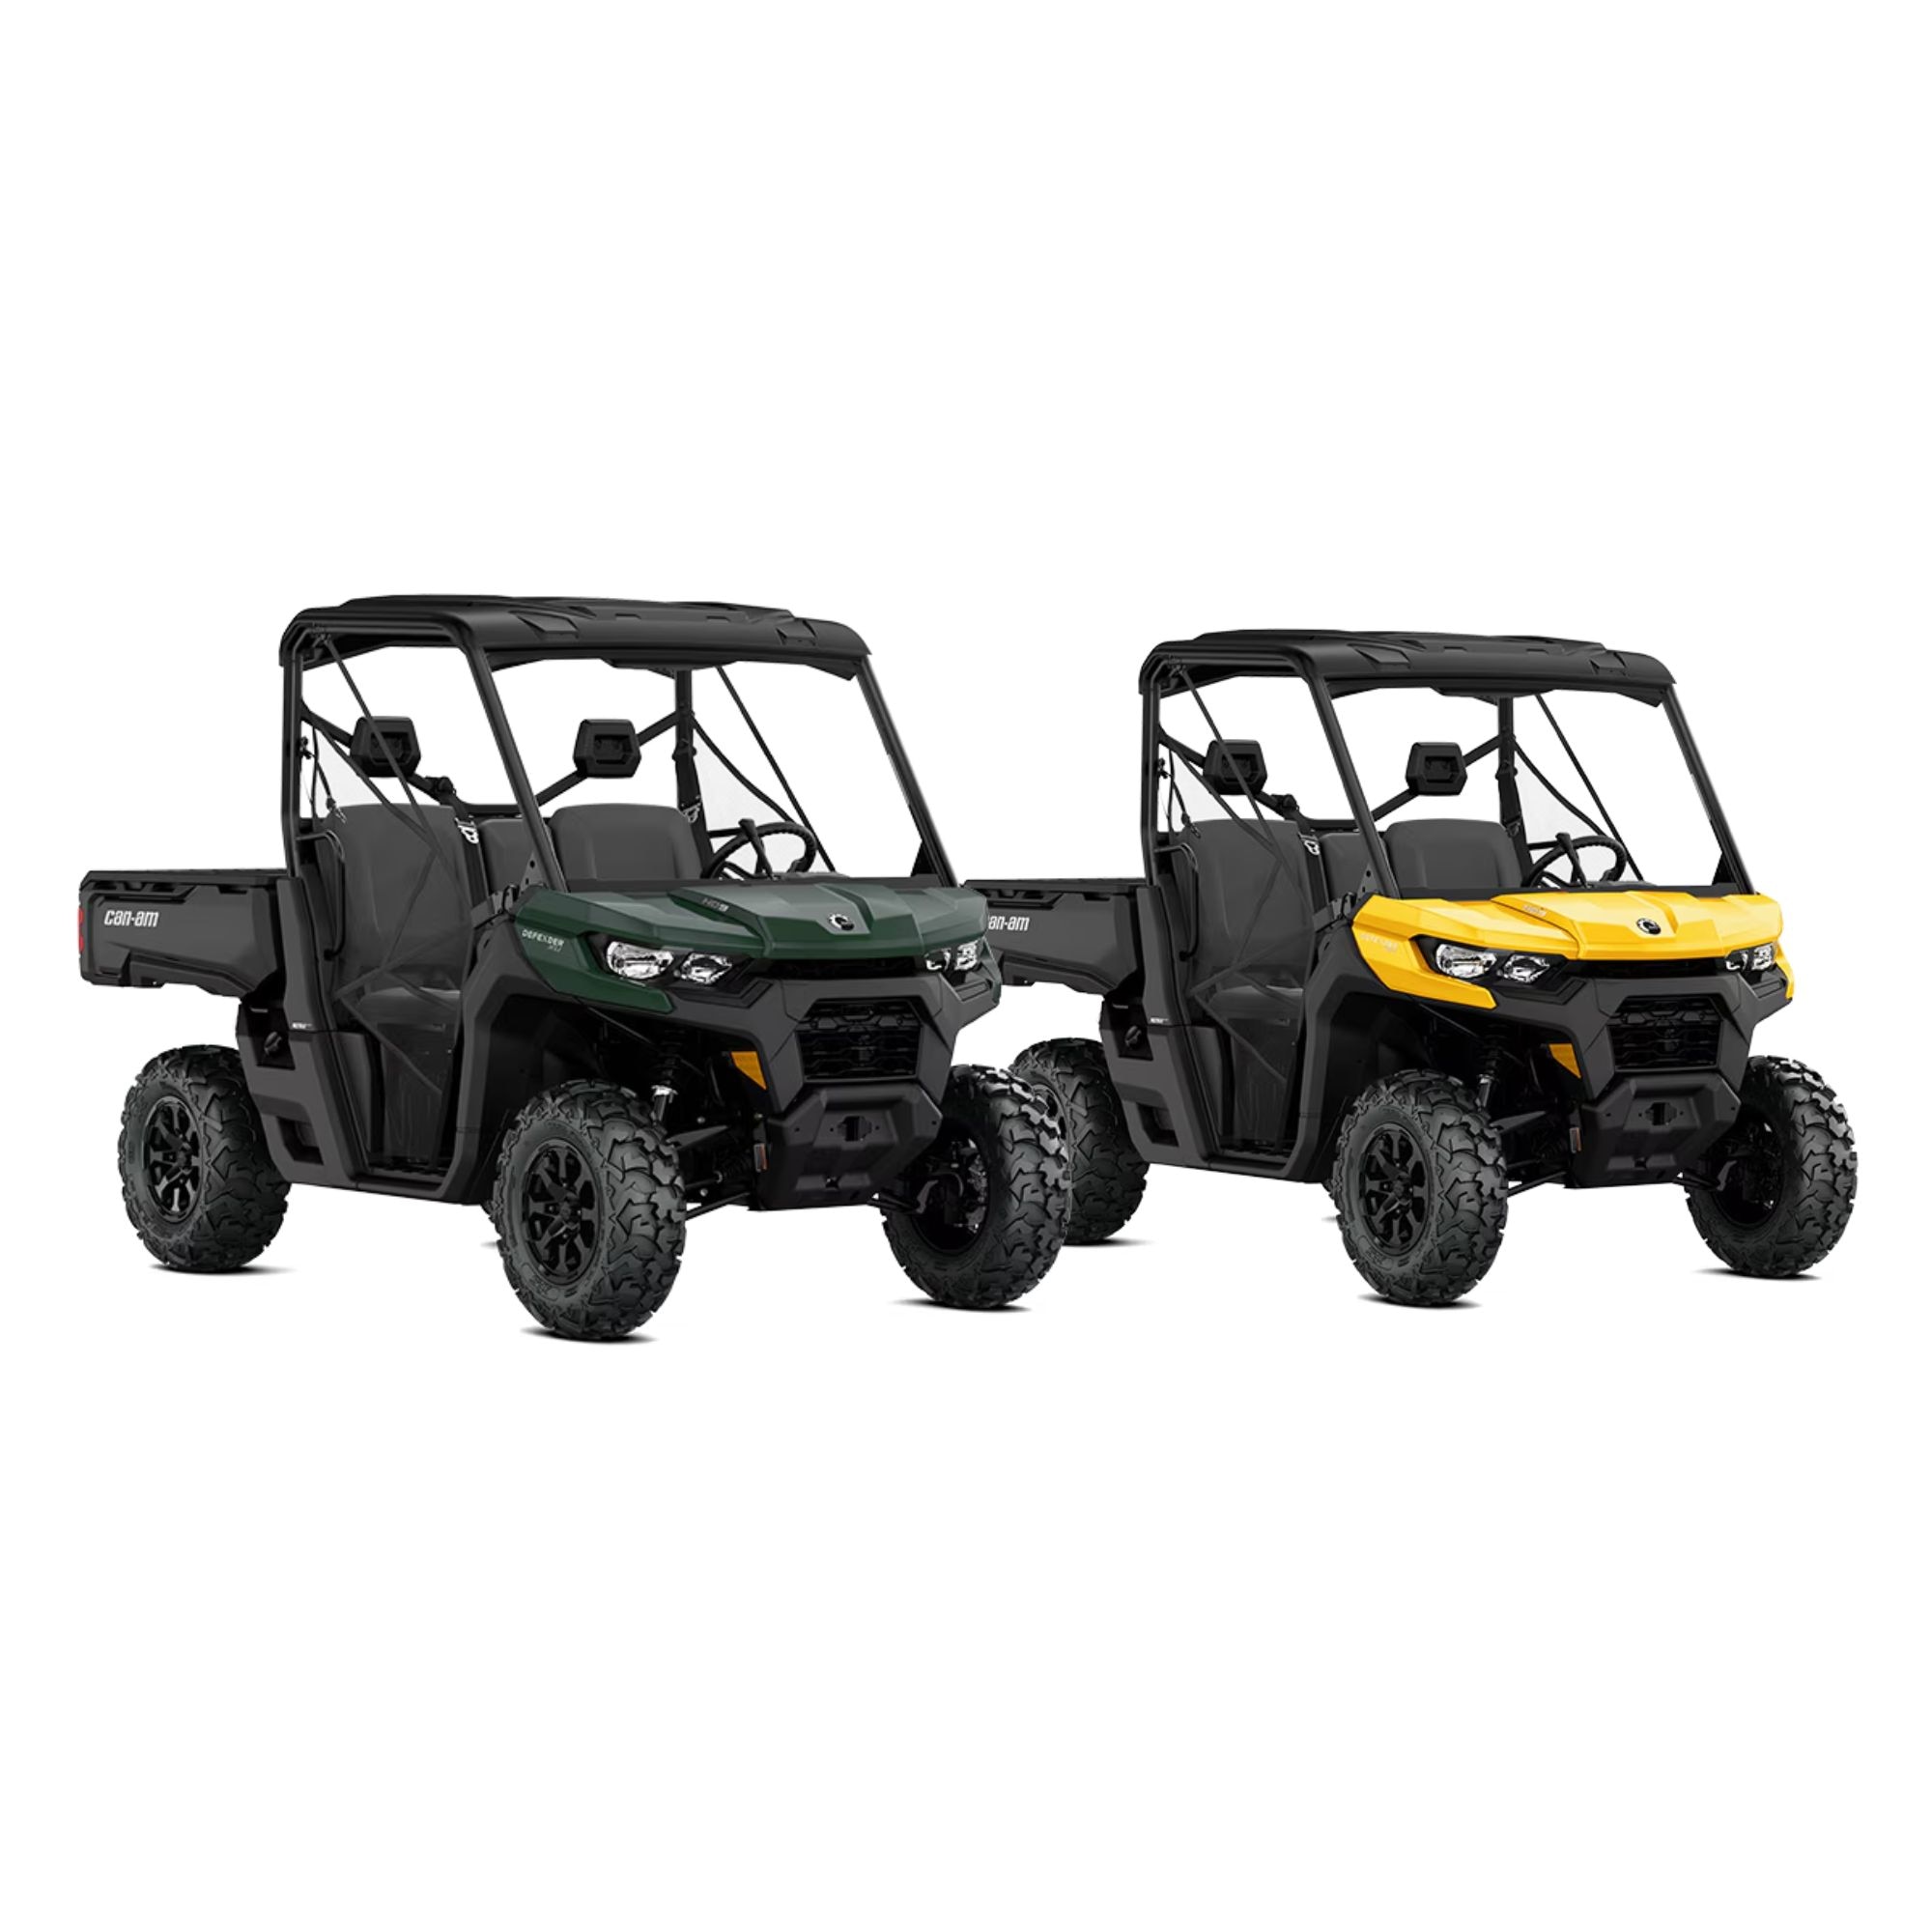 Two can-am defenders